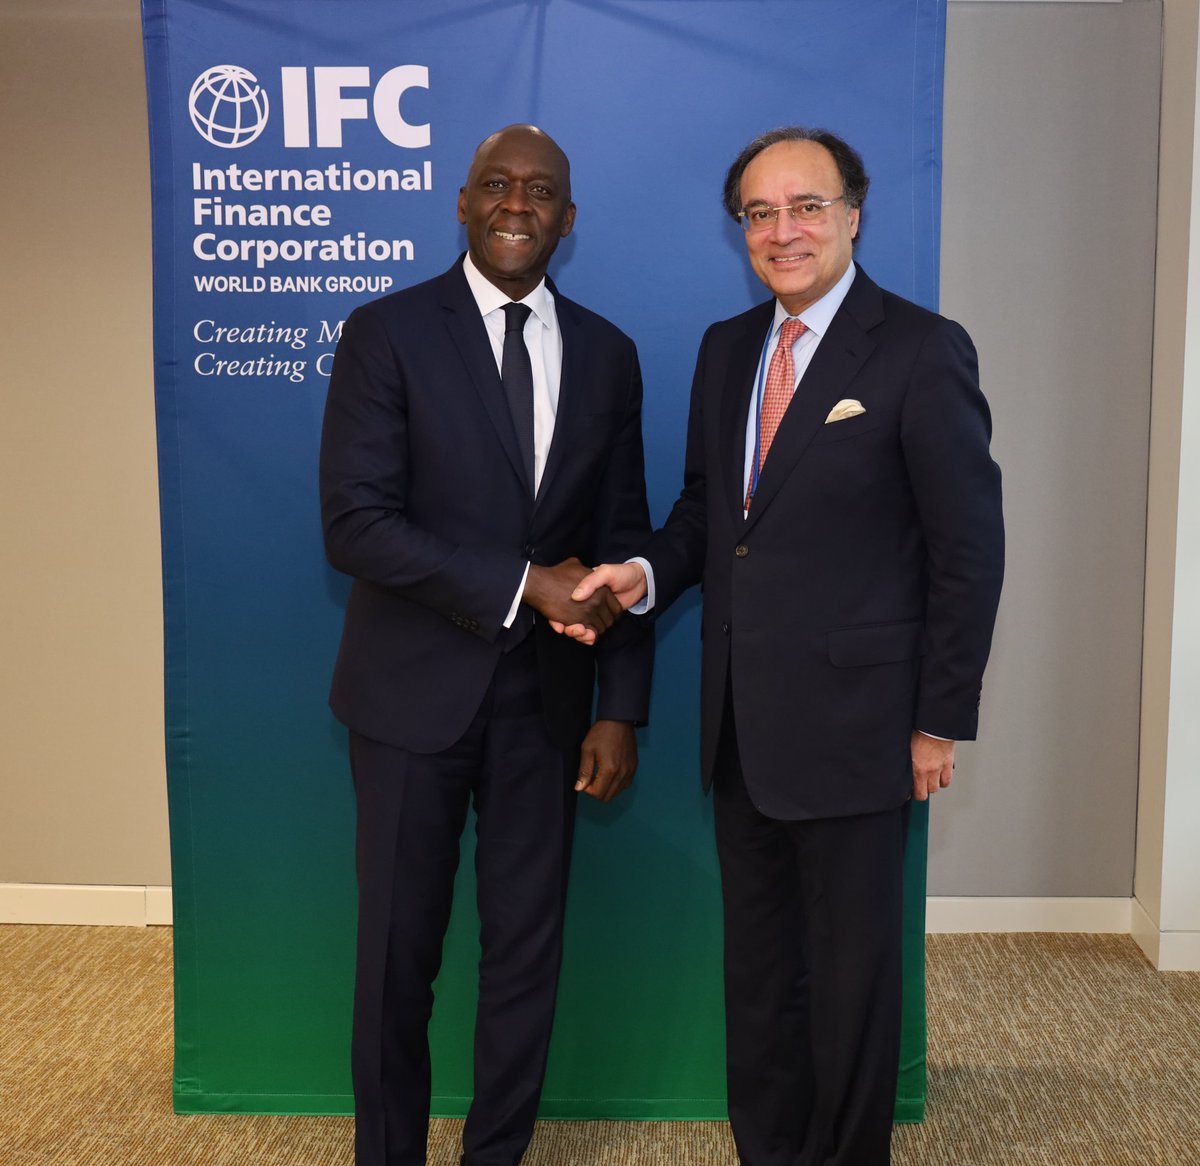 Finance Minister Muhammad Aurangzeb met with IFC Managing Director Makhtar Diop, highlighting positive economic indicators in Pakistan: improving reserves, stable currency, declining inflation, surging stock market, and institutional/foreign inflows. (1/3)